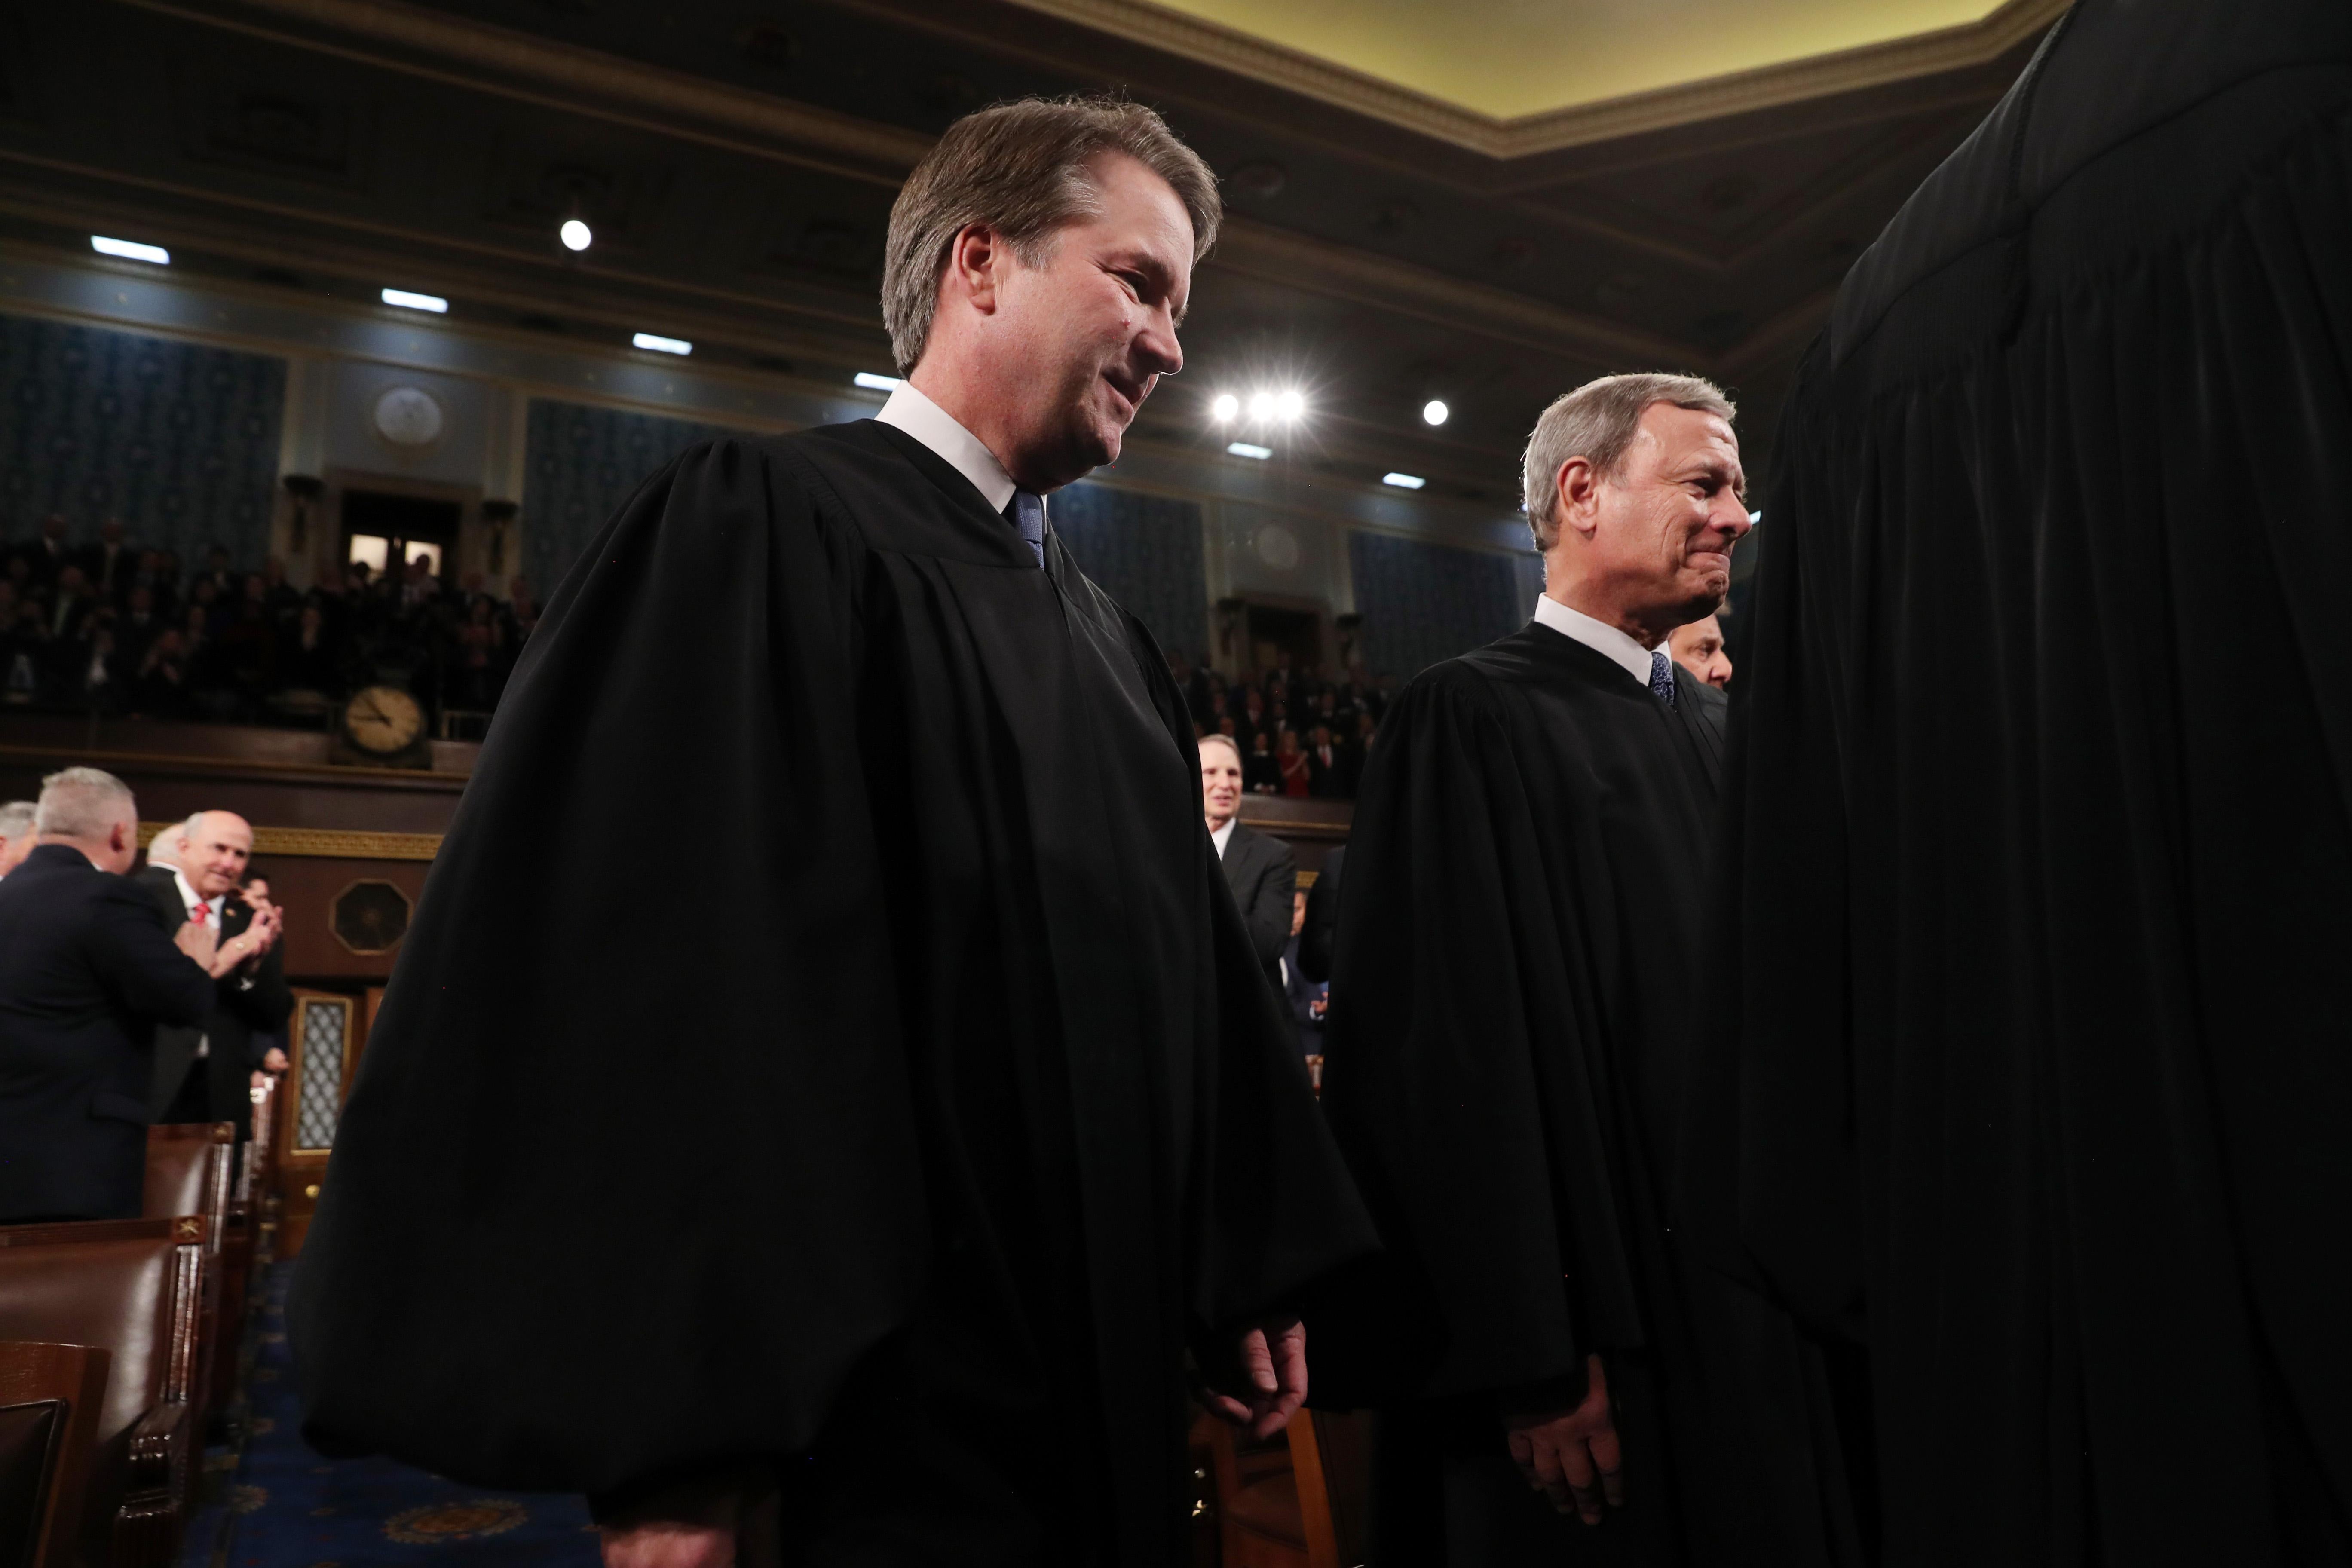 Supreme Court Justice Brett Kavanaugh and Chief Justice John Roberts arrive to hear President Donald Trump deliver the State of the Union address in the House chamber on February 4, 2020 in Washington, D.C.